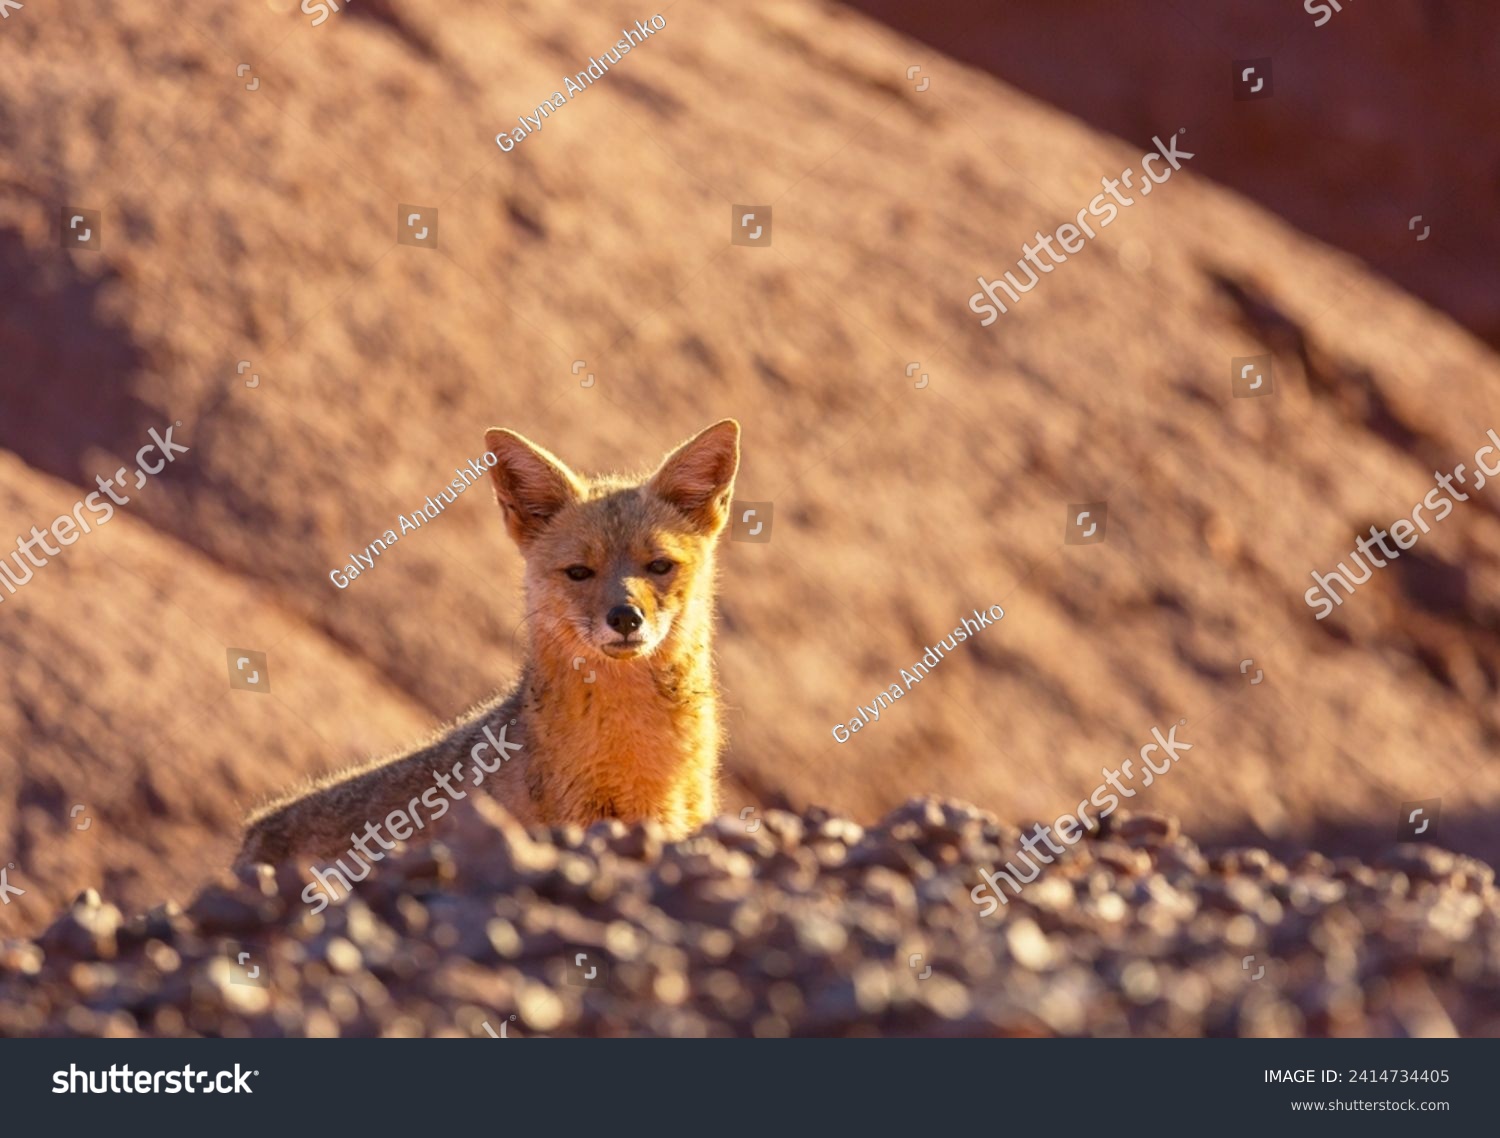 South American gray fox (Lycalopex griseus), Patagonian fox, in Patagonia mountains #2414734405